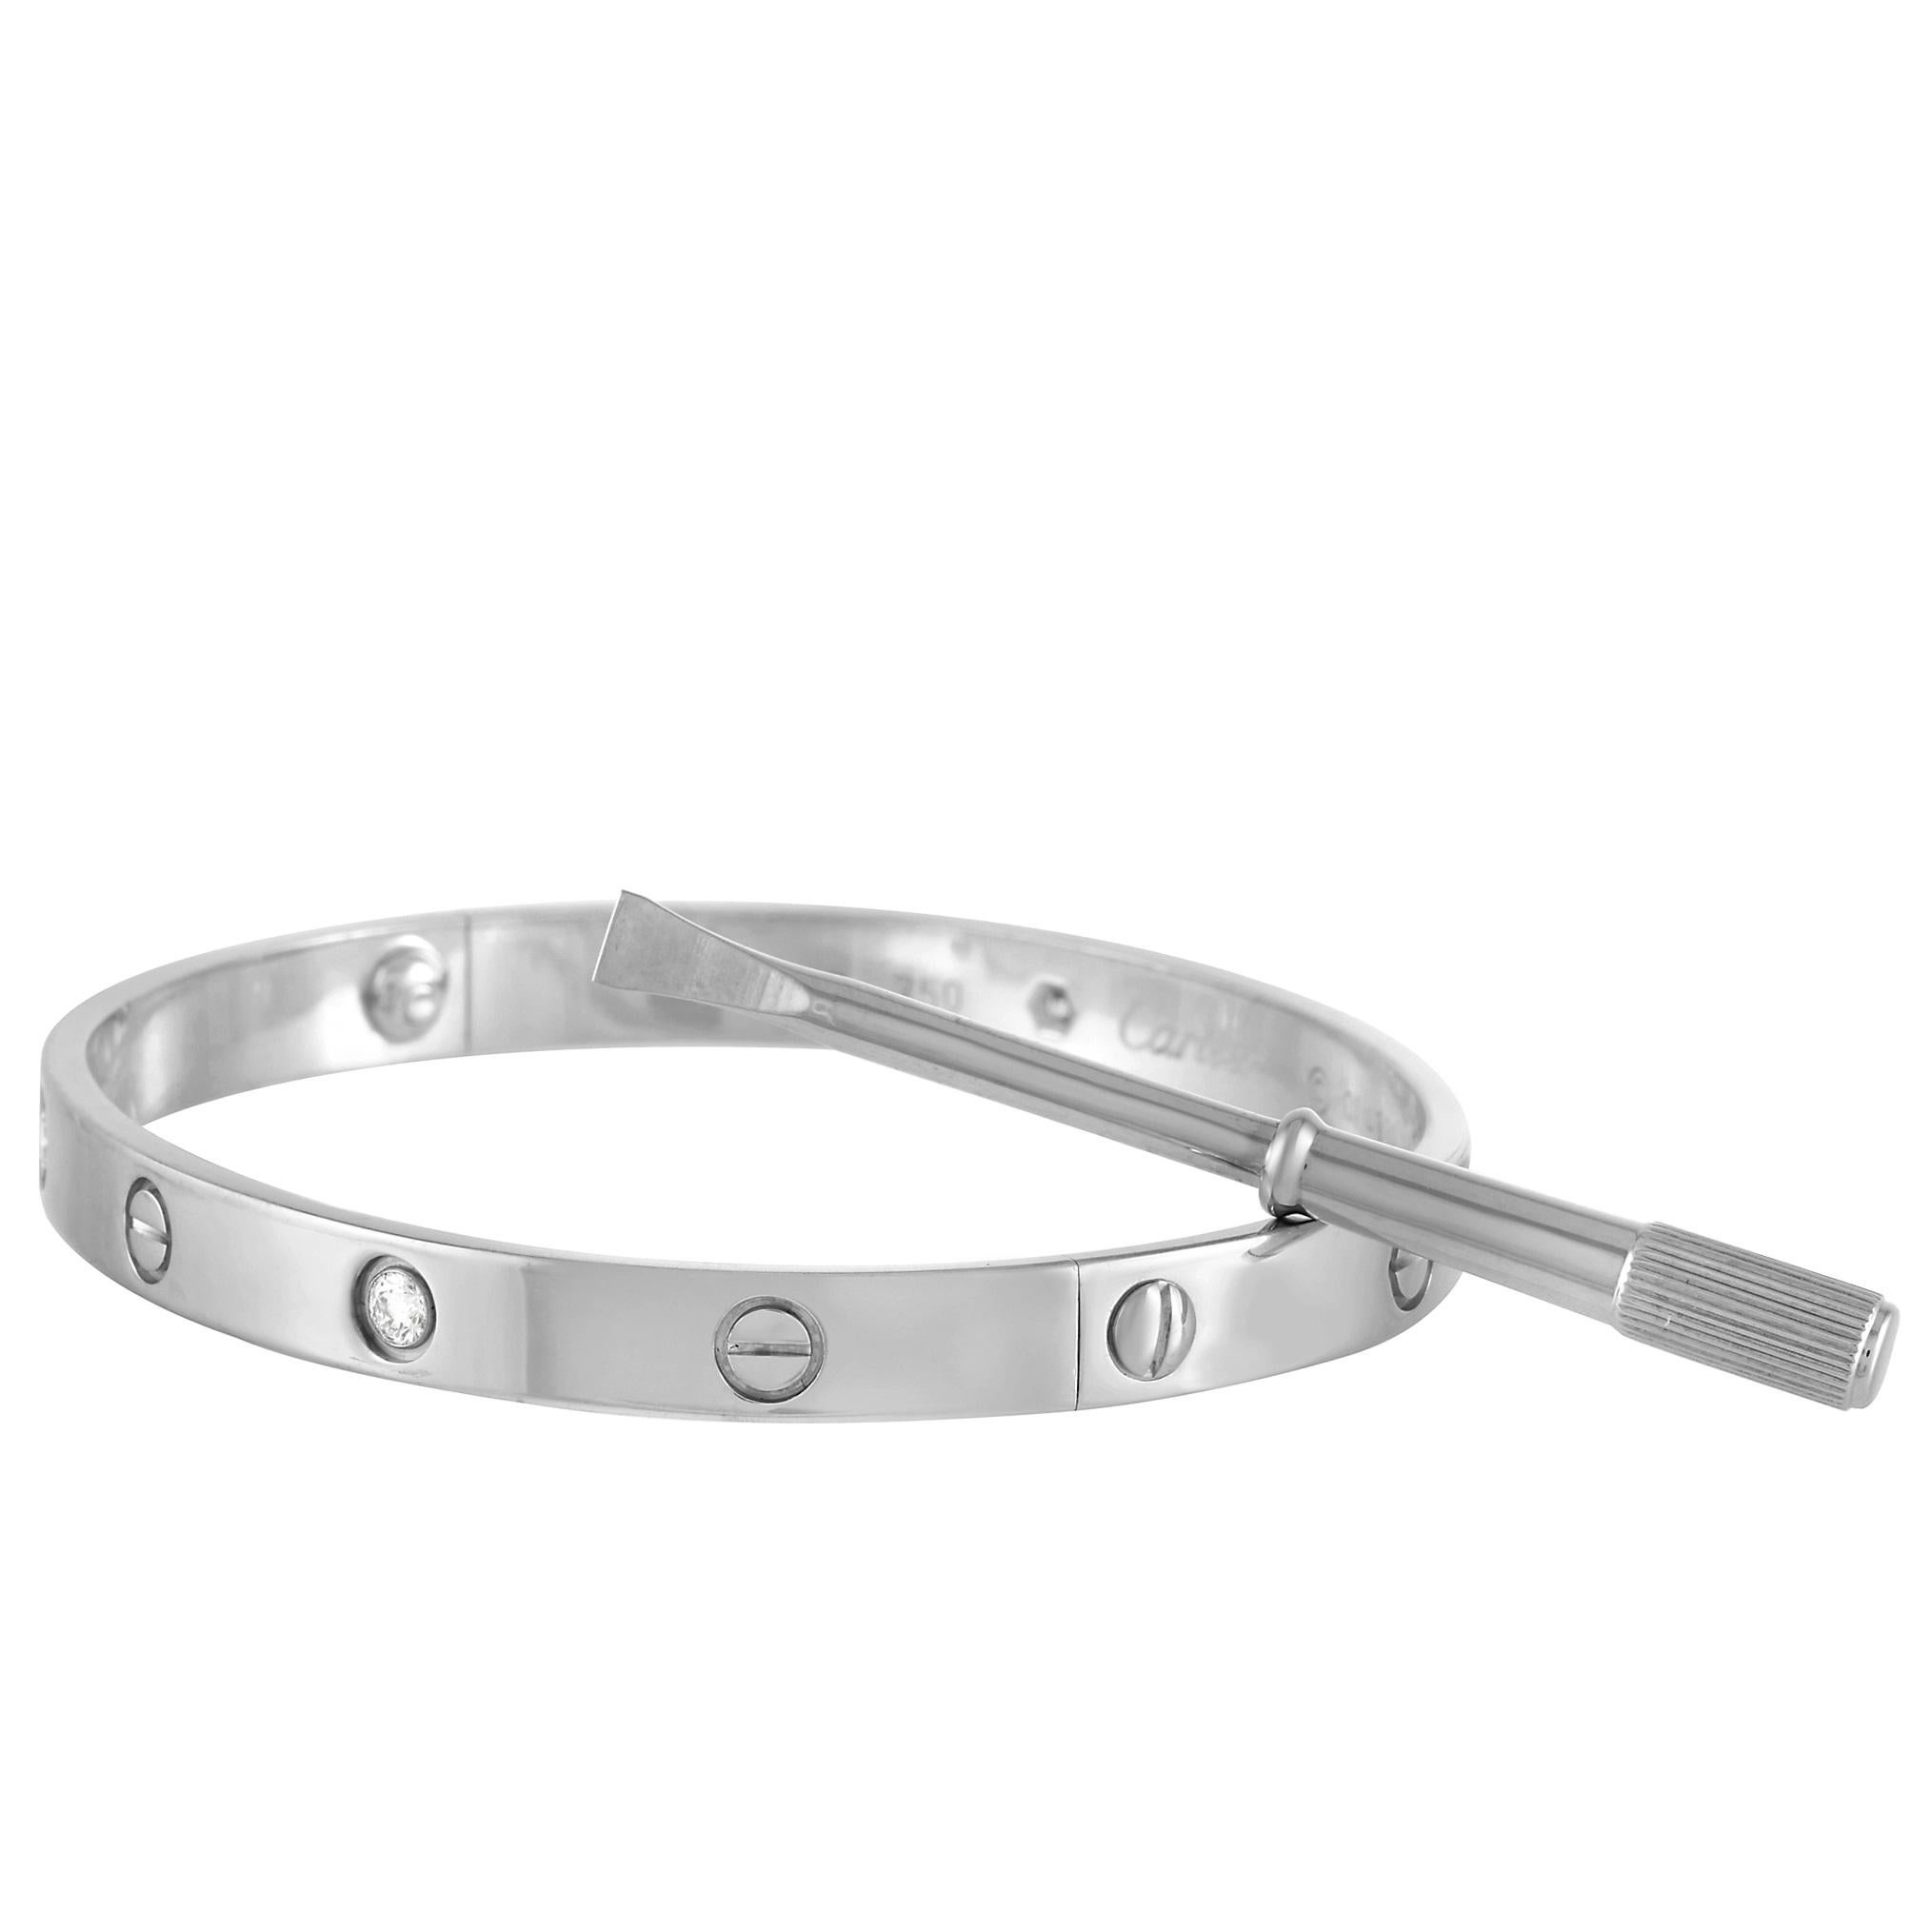 It doesn’t get any more iconic than this 7.5” bangle bracelet from the Cartier Love collection. Adorned with 4 diamonds and the brand’s signature screw accents, this size 19 bracelet is ideal for everyday wear. 
